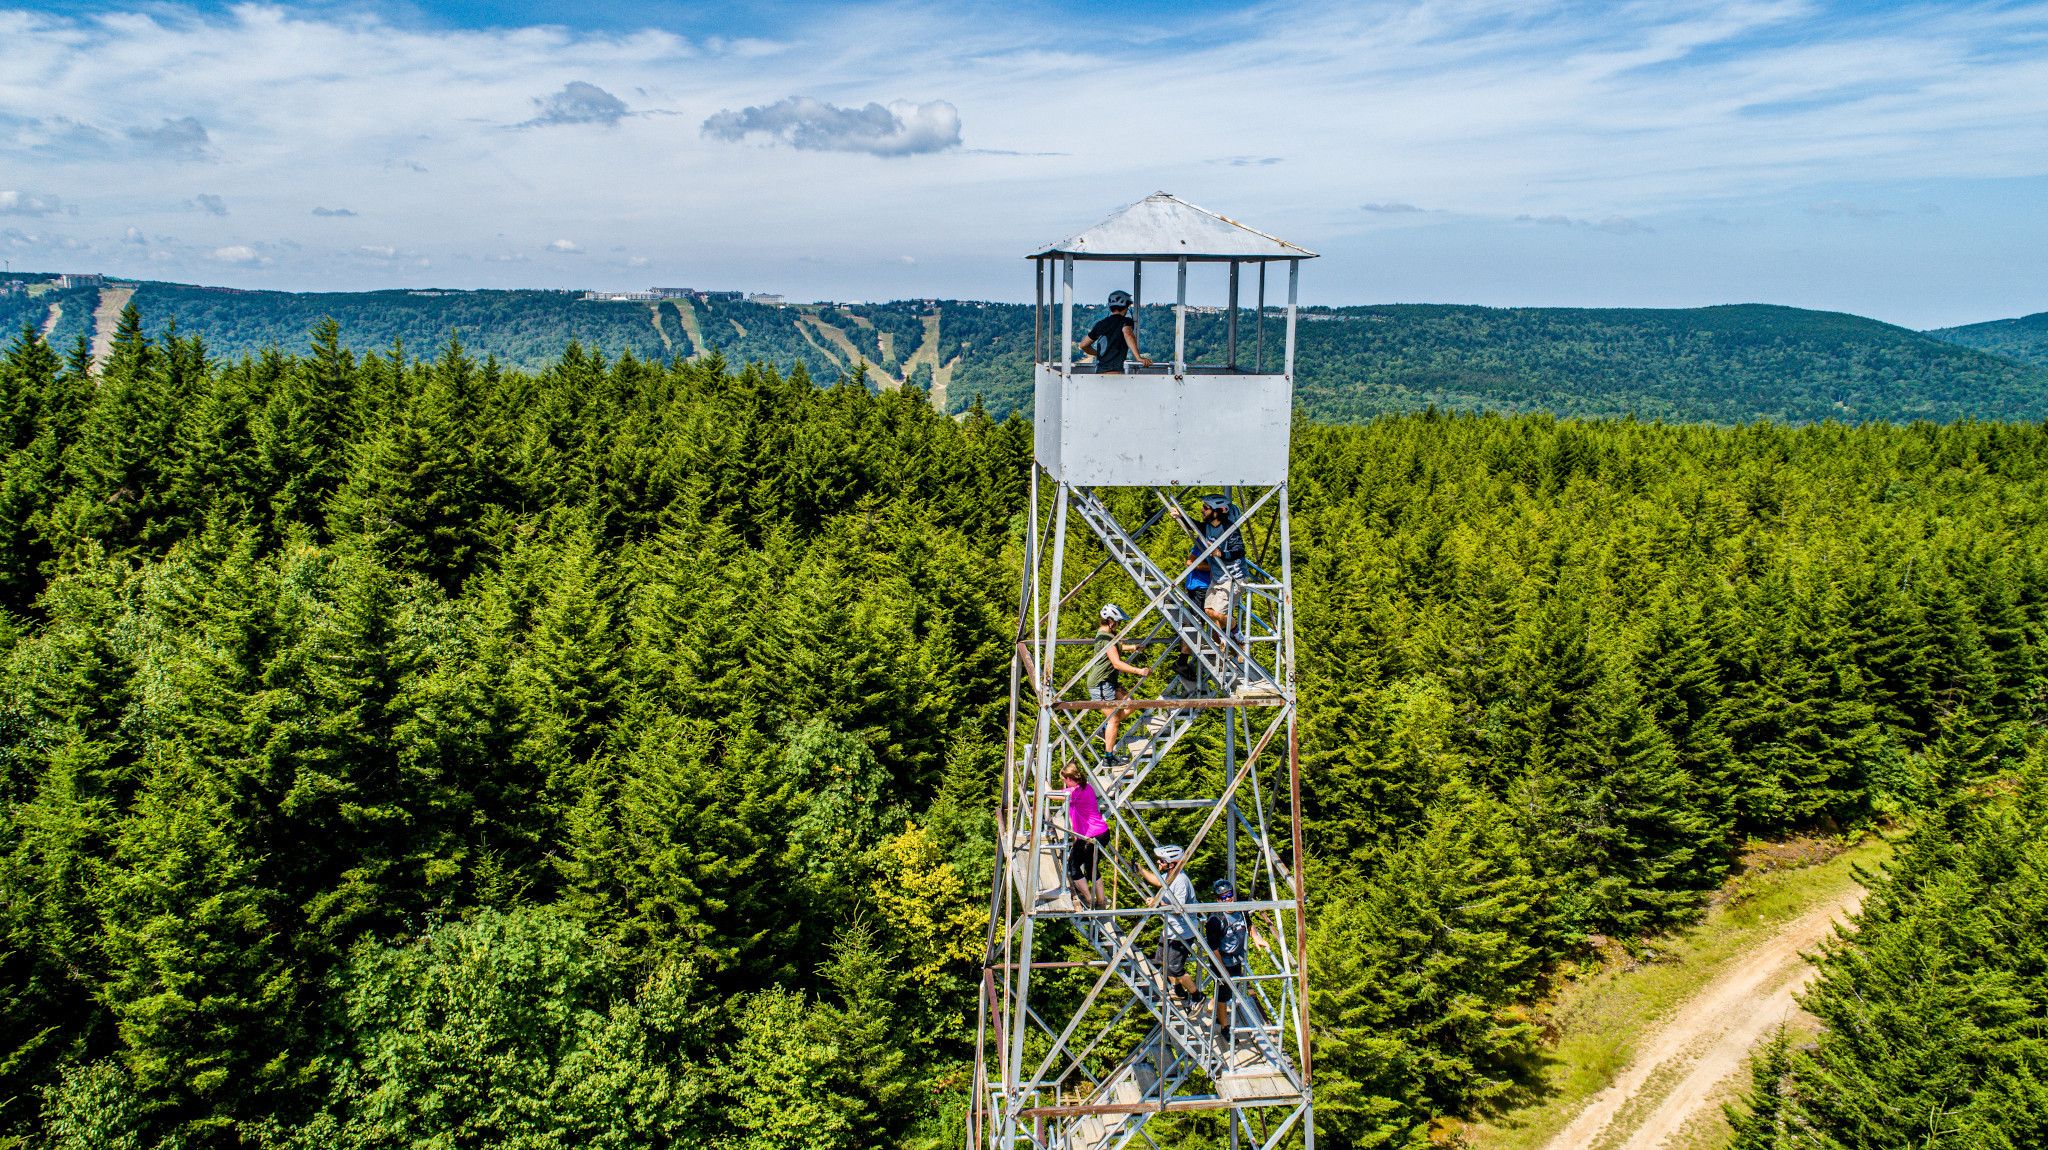 The Snowshoe Fire Tower